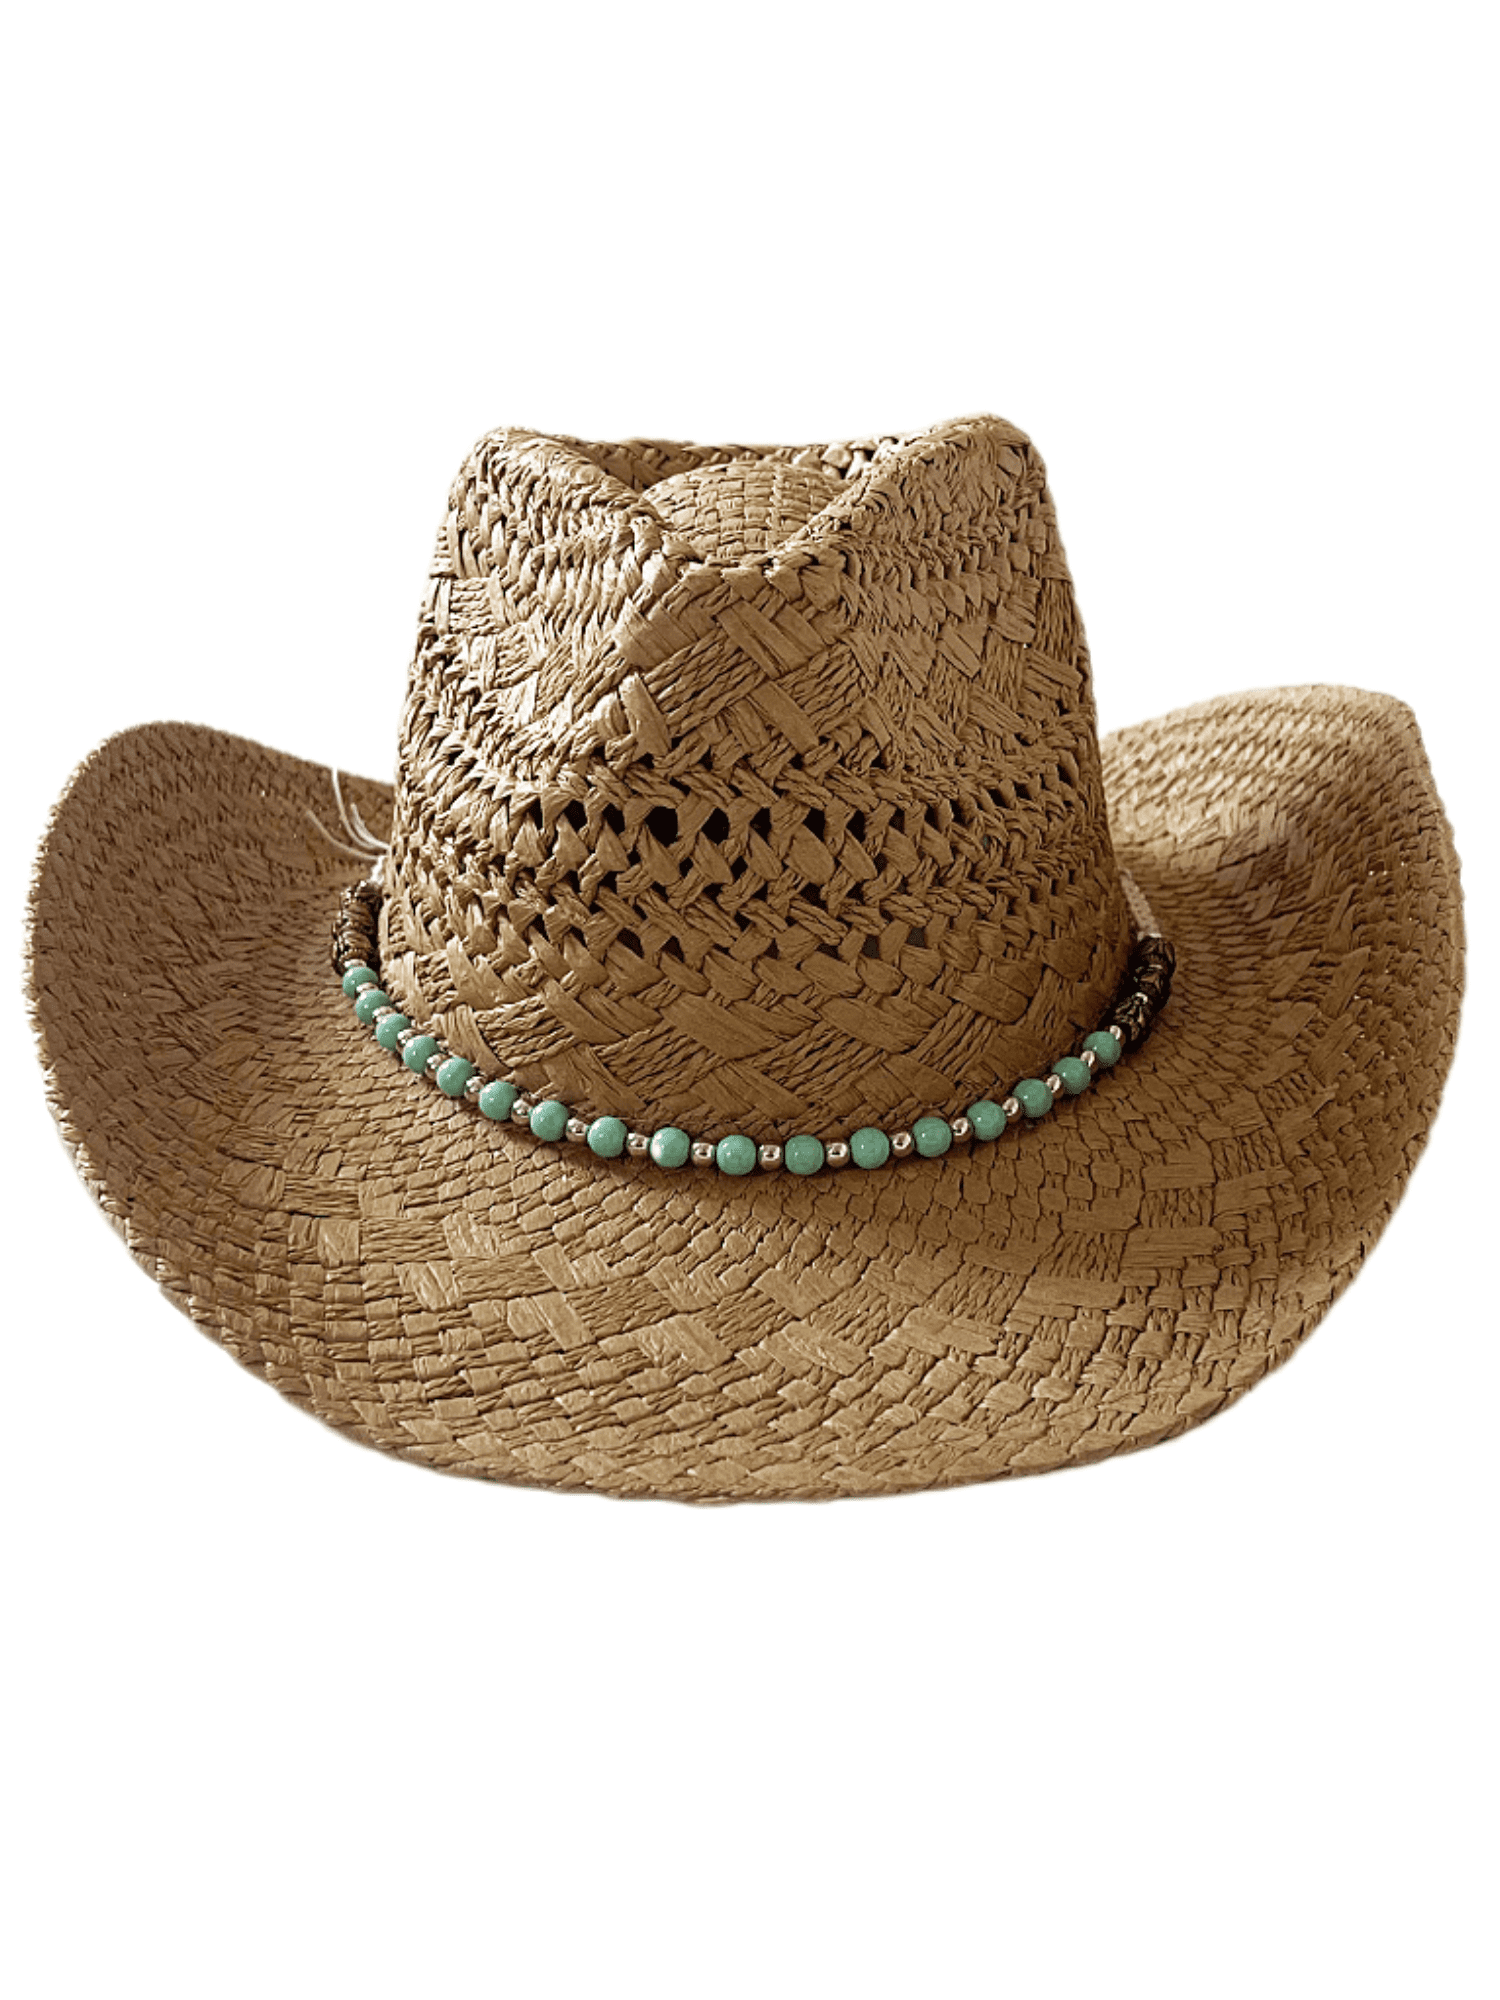 Keevoom Straw Cowboy Hats for Women Men Vintage Beach Sunshade Hat With ...